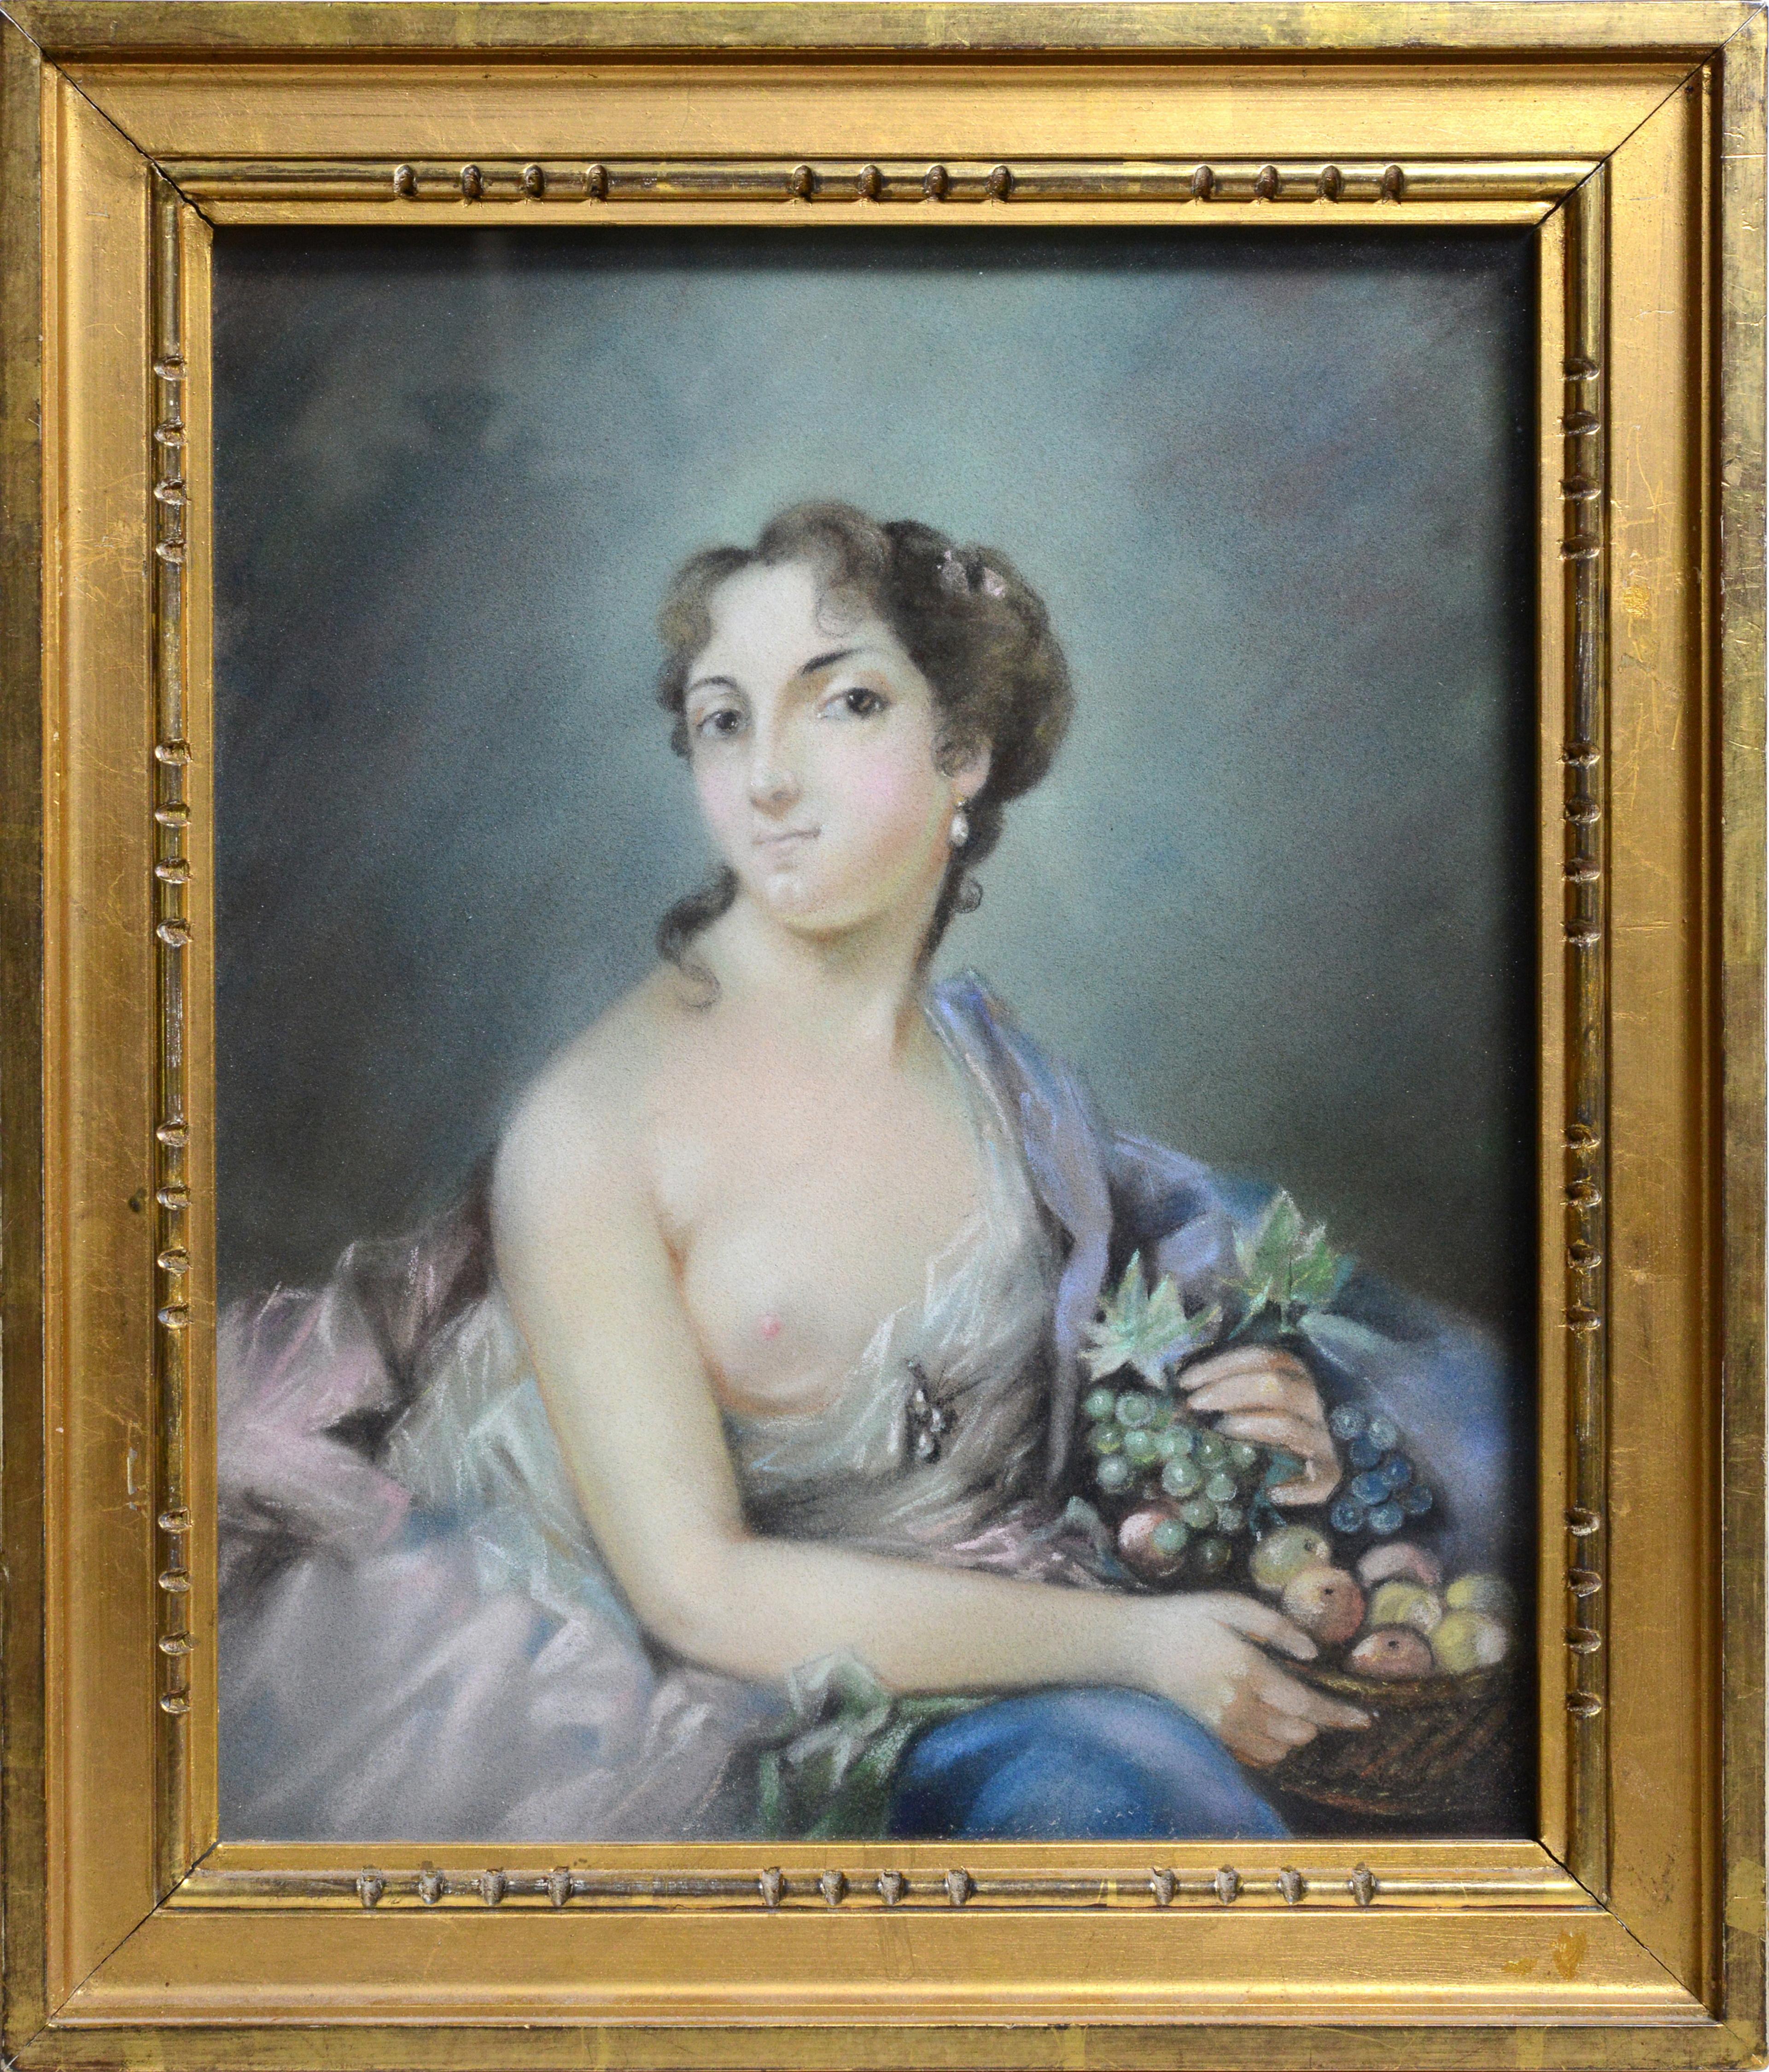 Rococo portrait Nude lady in Royal mantle Early 20th century Pastel drawing